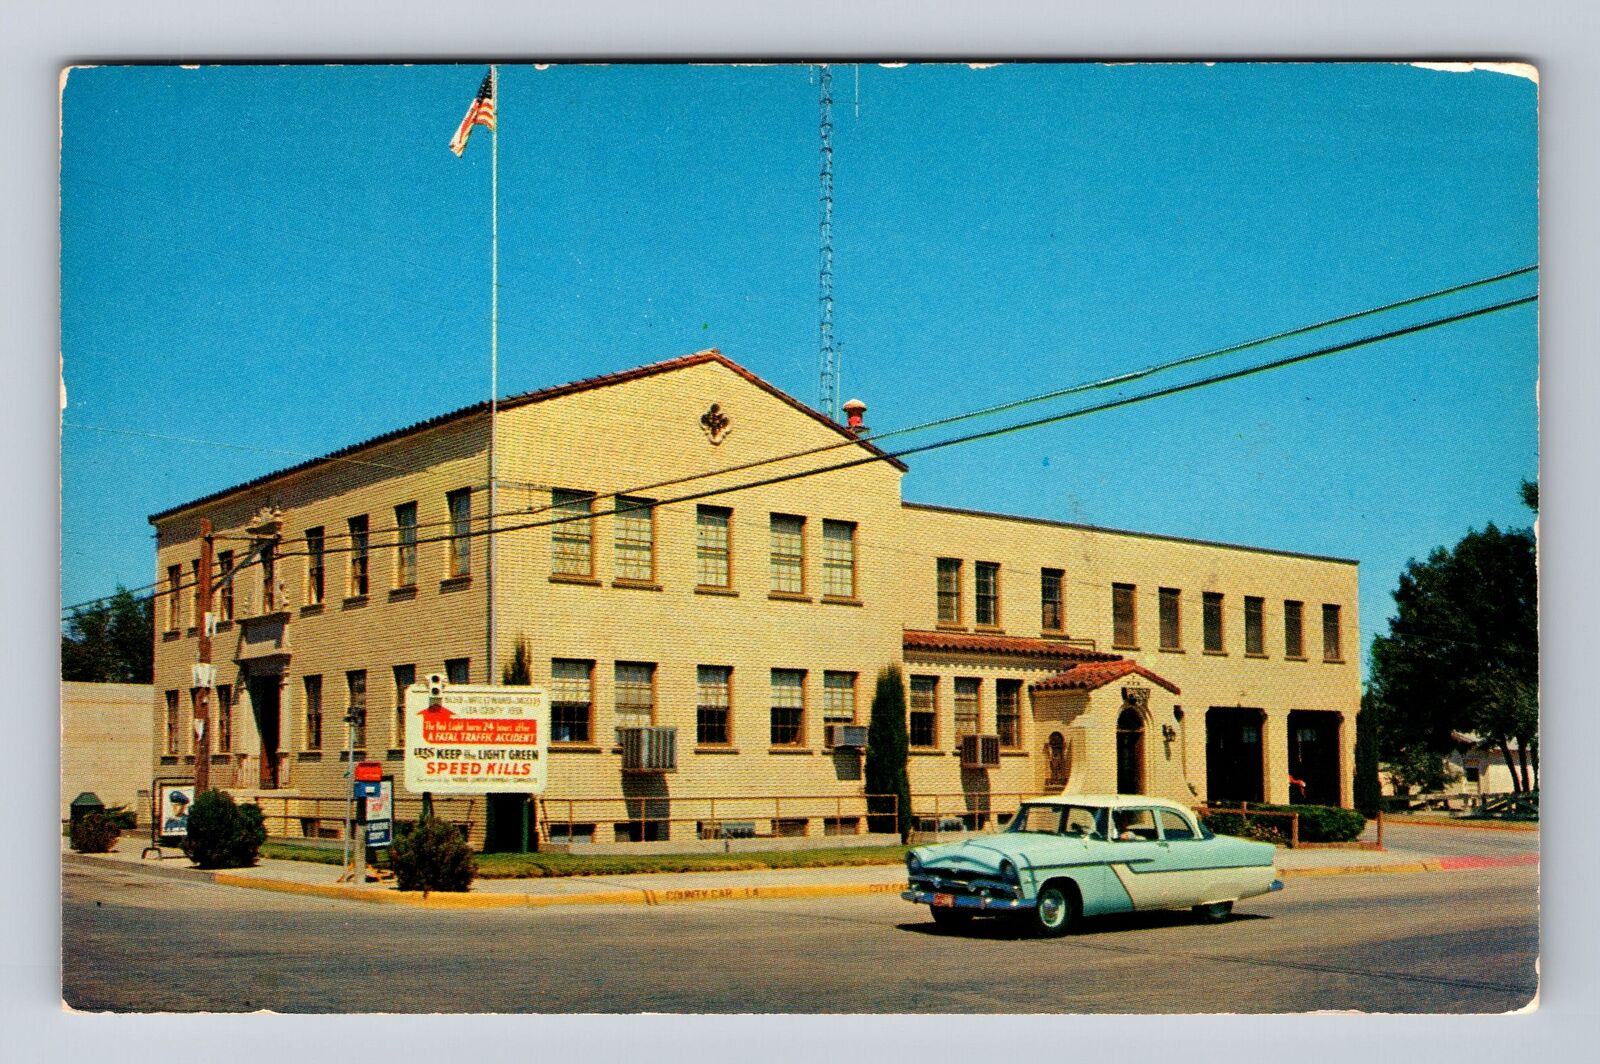 Hobbs NM-New Mexico, City Hall, Municipal Offices Building, Vintage Postcard